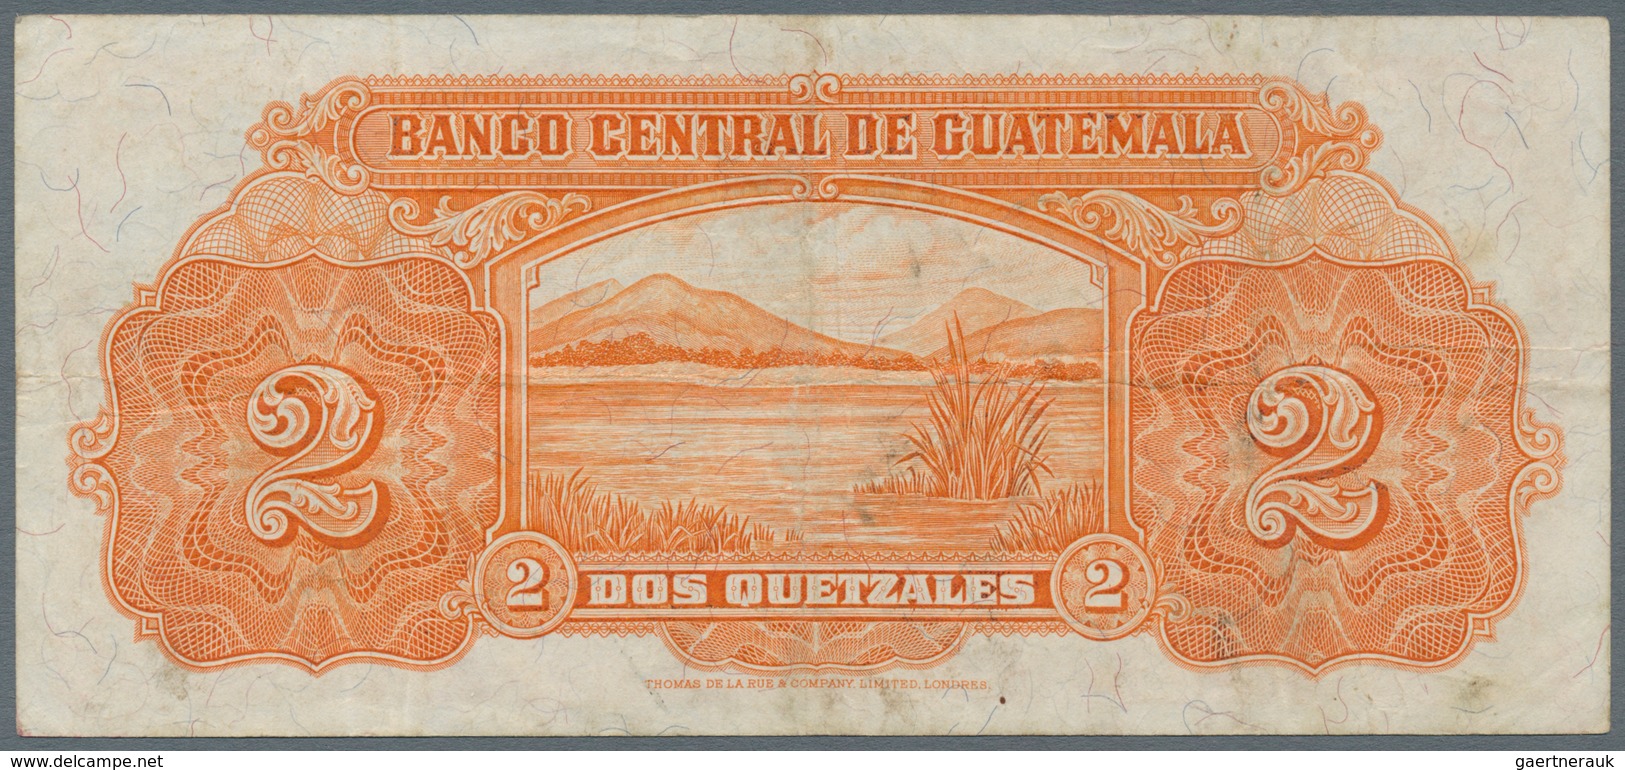 Guatemala: Rare Banknote 2 Quetzales 1936 P. 15, Used With Several Folds In Paper, No Holes Or Tears - Guatemala